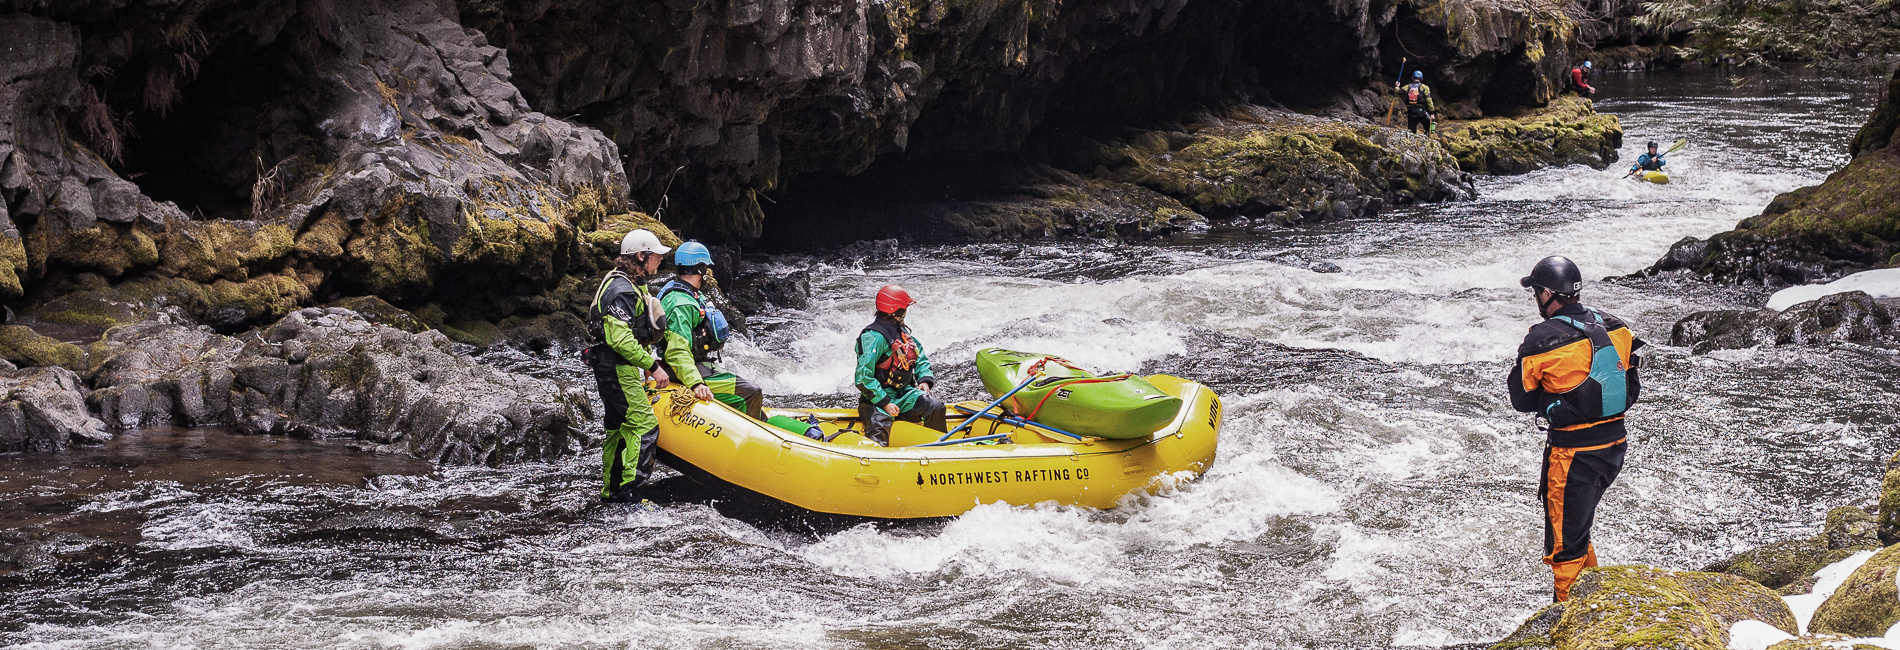 IRF Guide Training Workshop on the White Salmon River